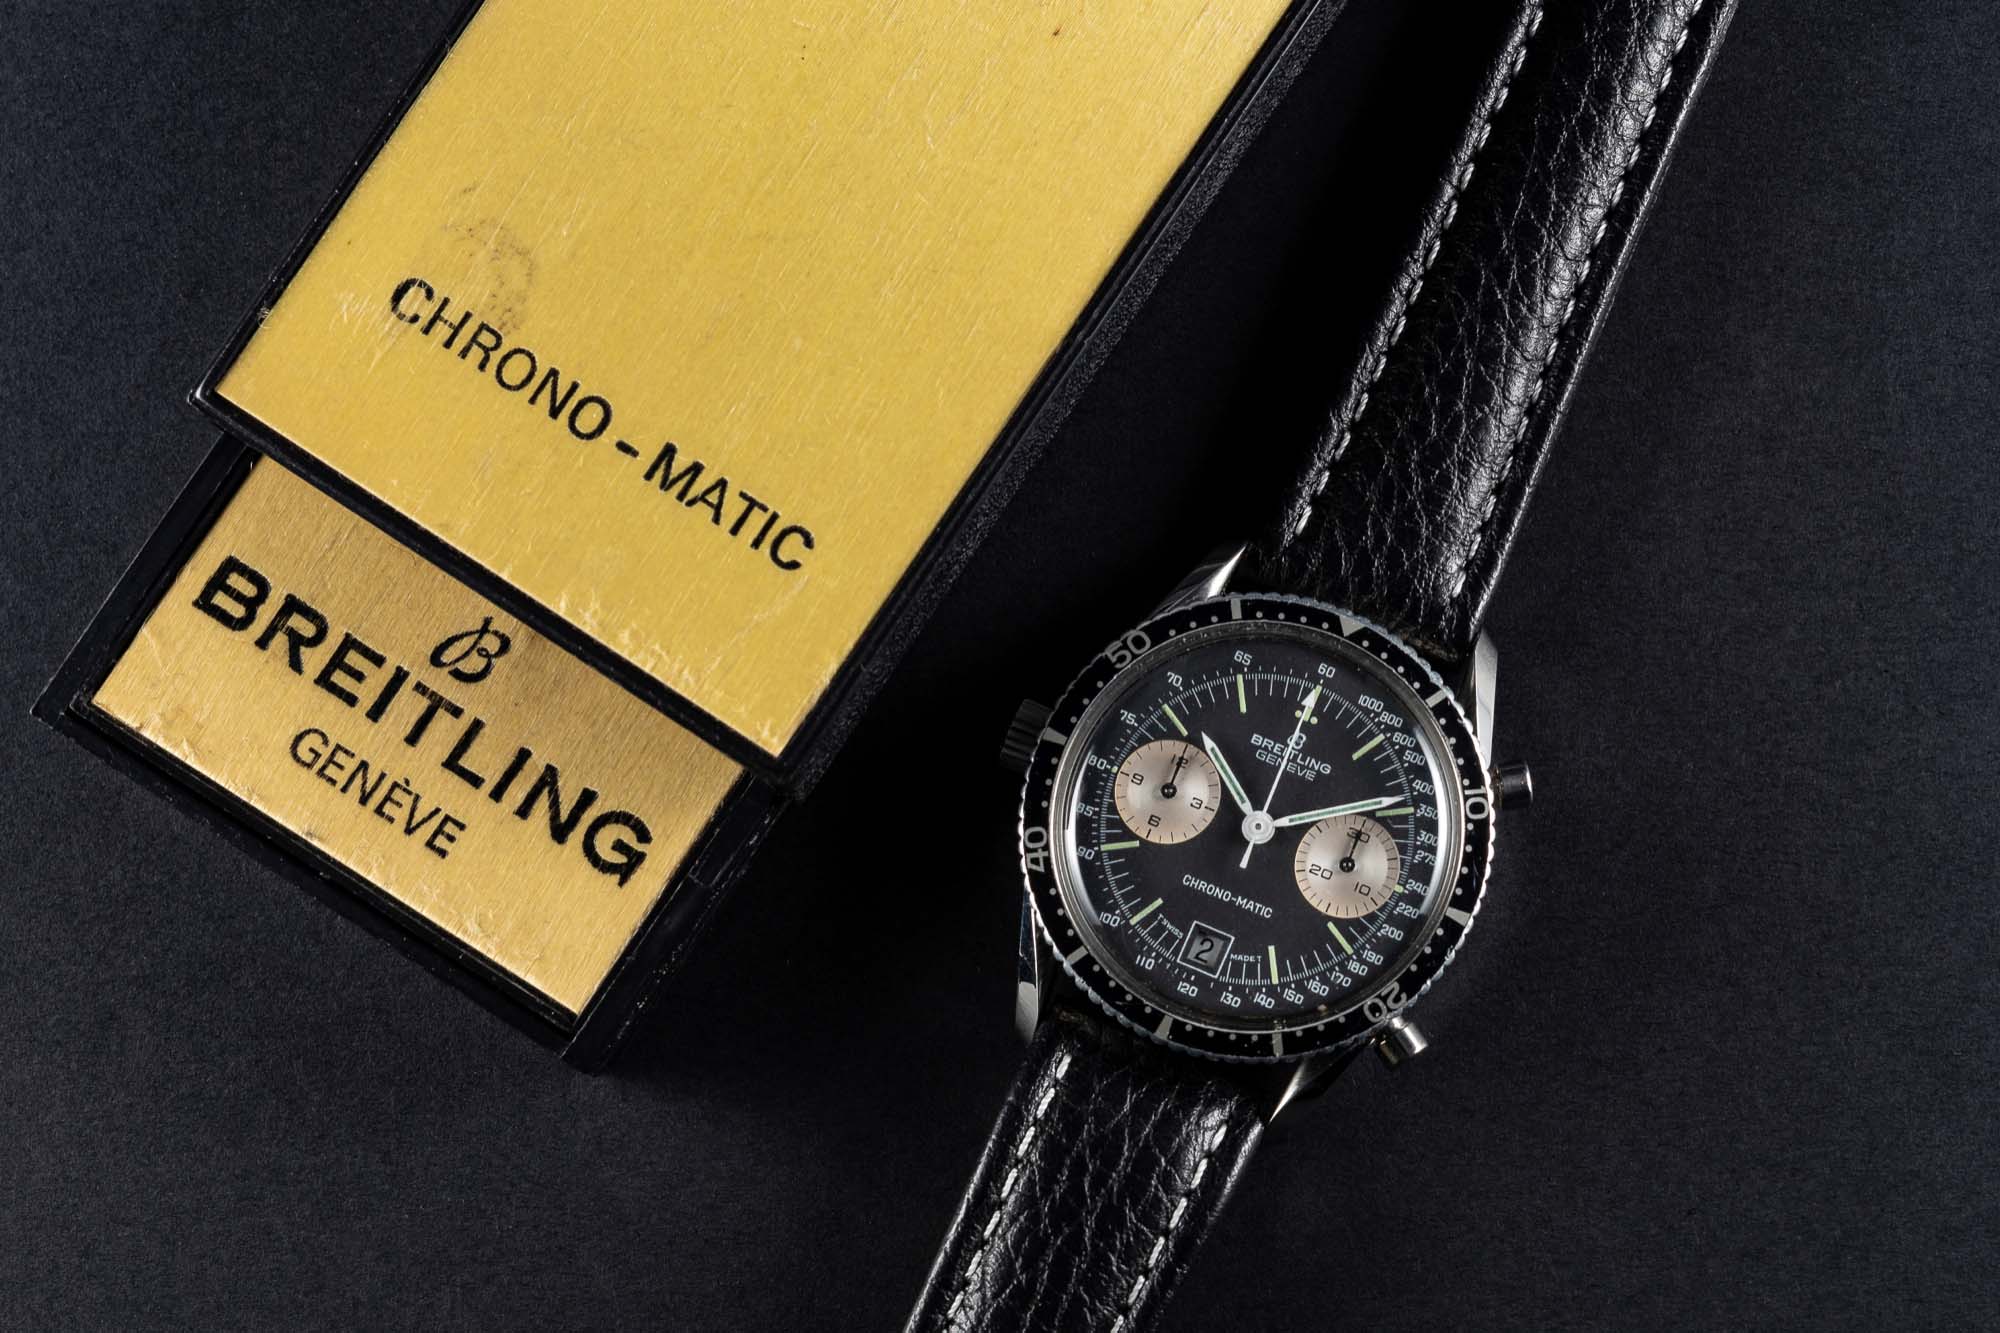 A RARE GENTLEMAN'S STAINLESS STEEL BREITLING CHRONO-MATIC CHRONOGRAPH WRIST WATCH CIRCA 1977, REF. - Image 2 of 12